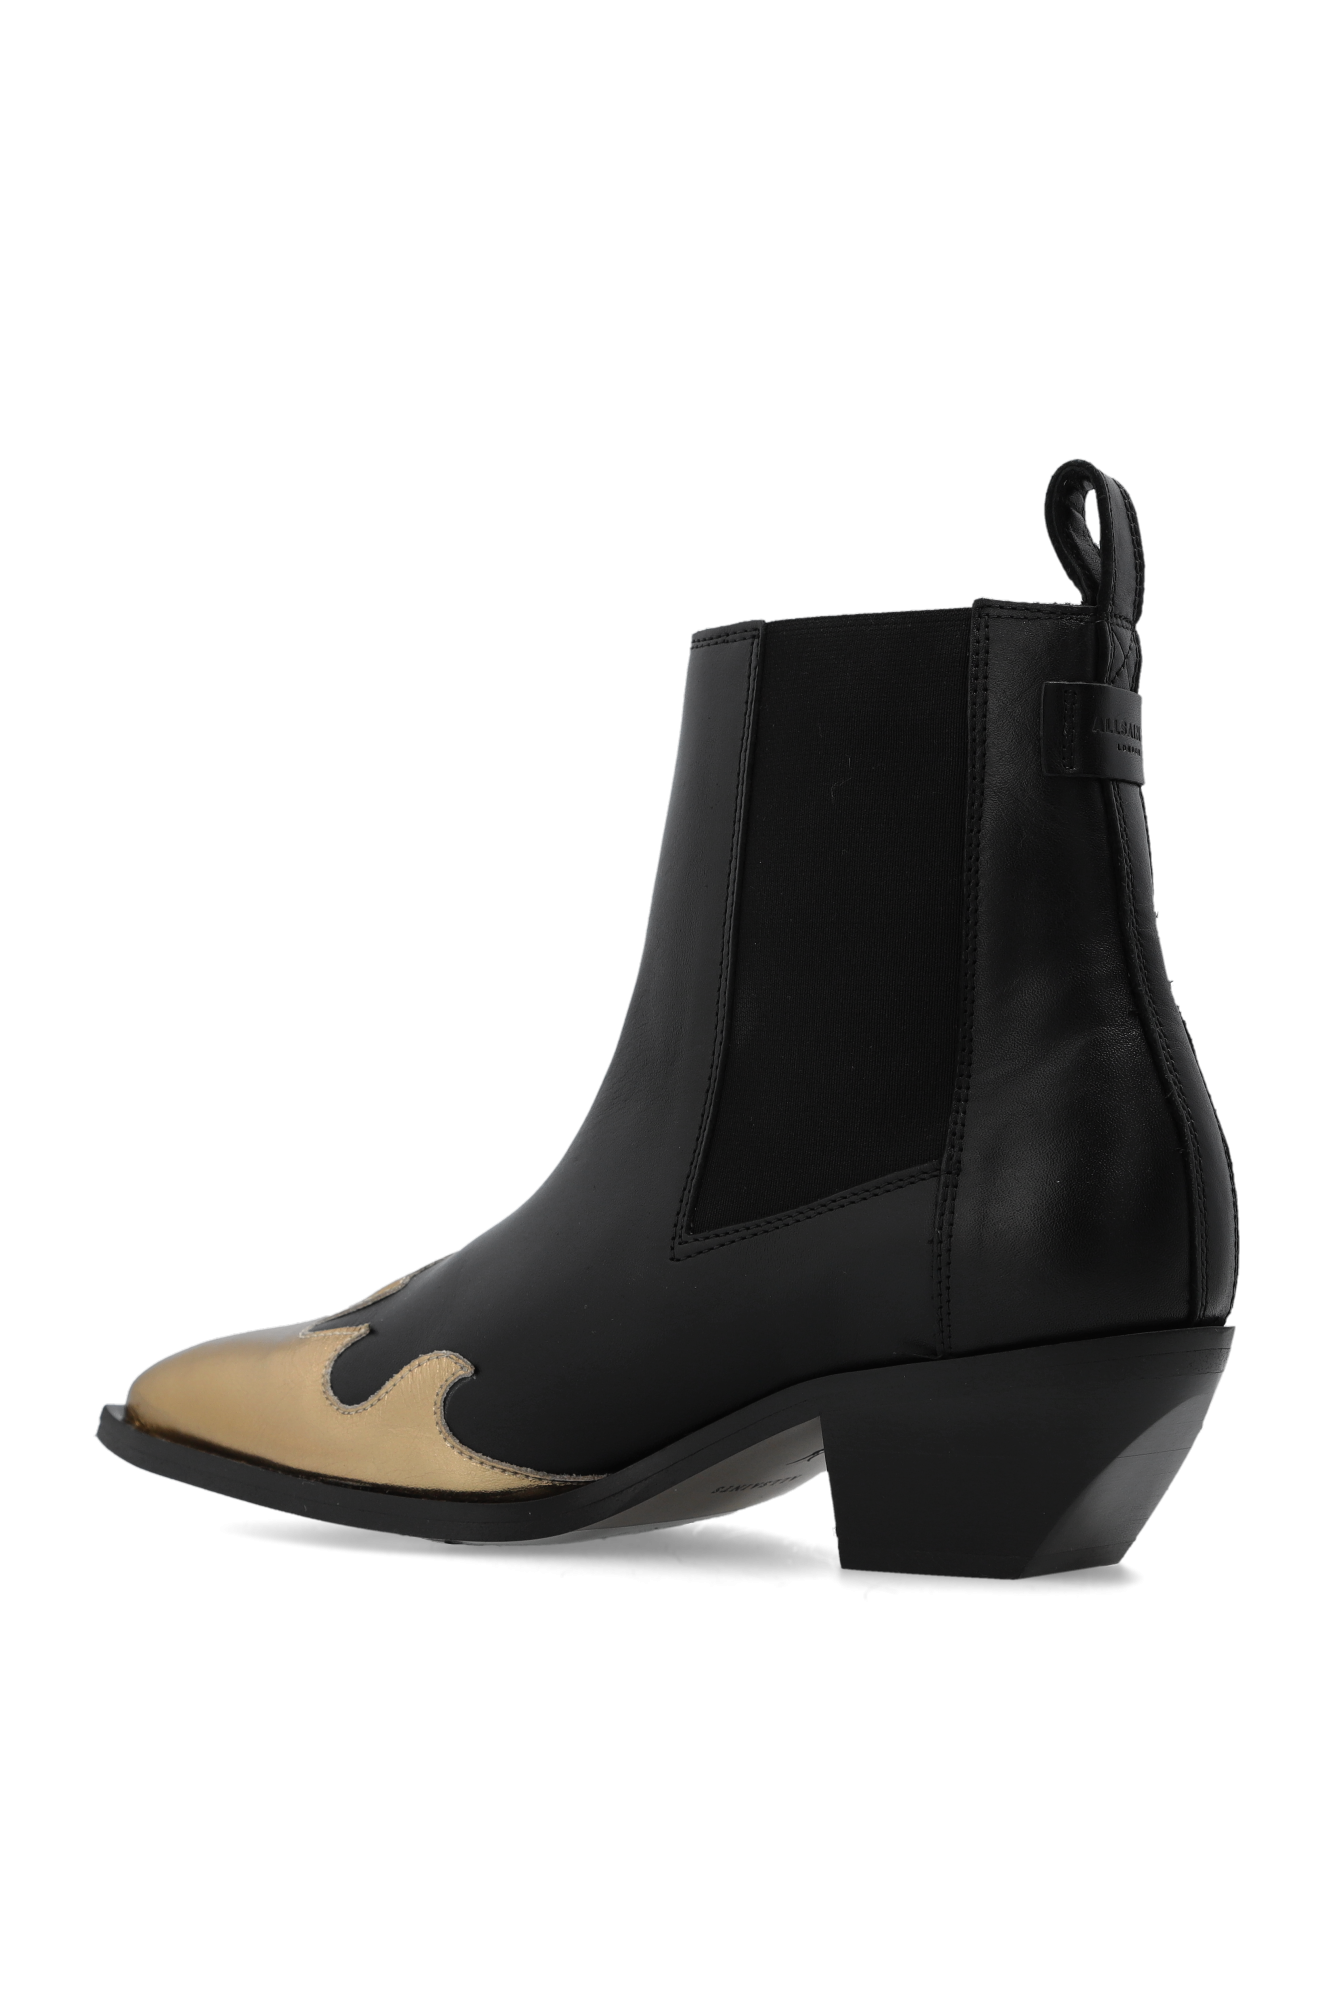 AllSaints ‘Dellaware’ heeled ankle boots